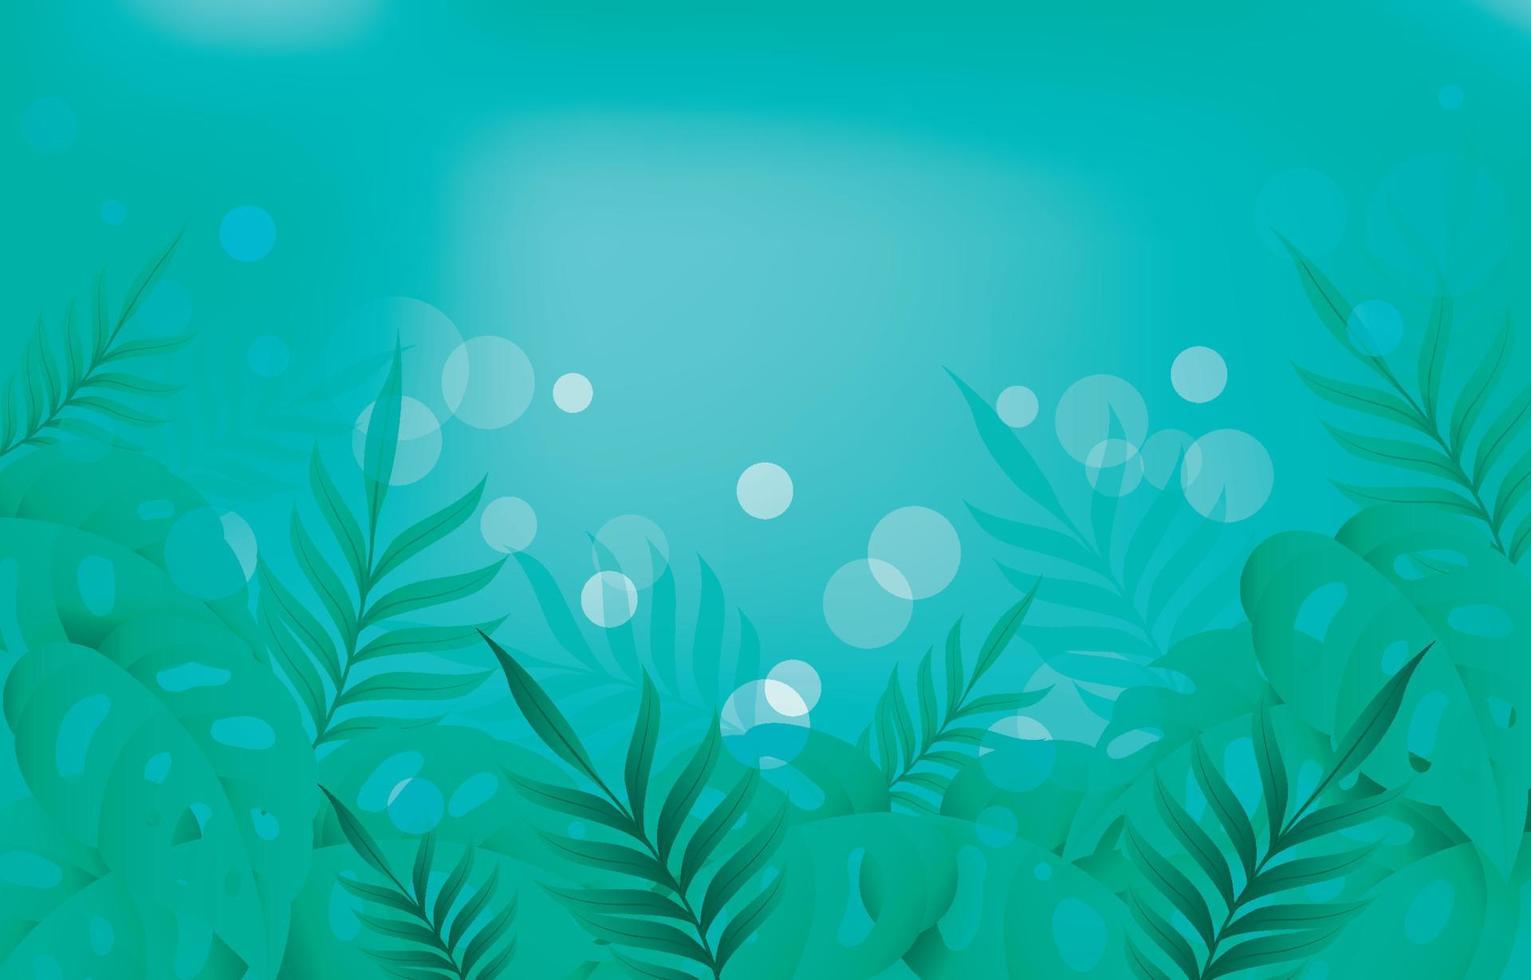 Tropical Leaves With Mint Green Colour vector